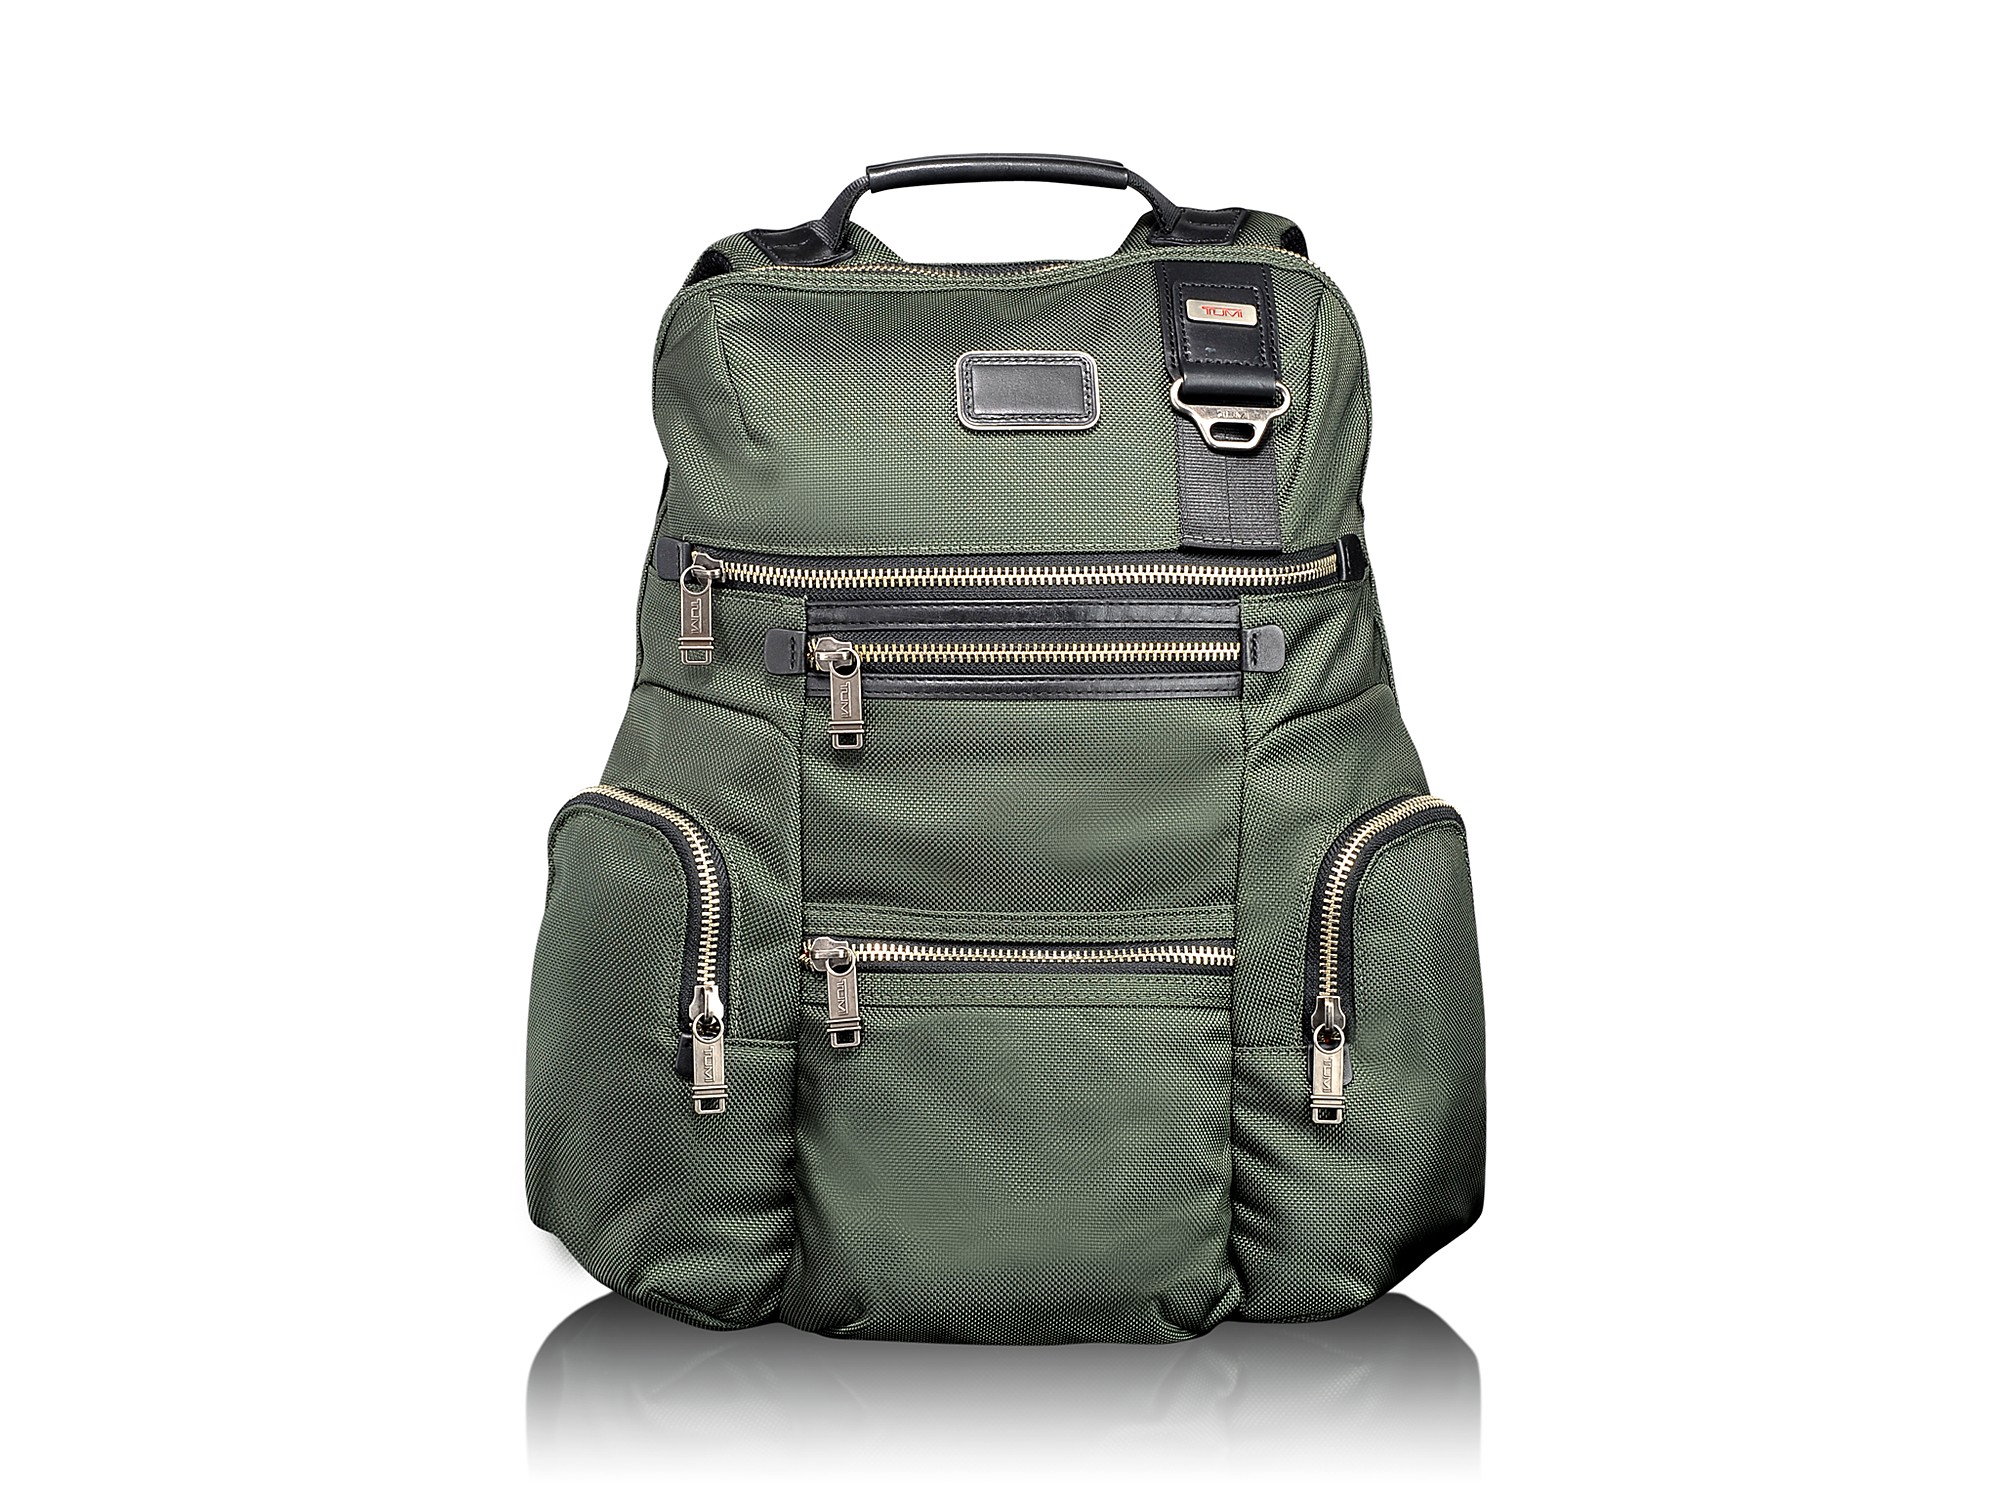 Tumi Alpha Bravo Knox Backpack in Green for Men - Lyst